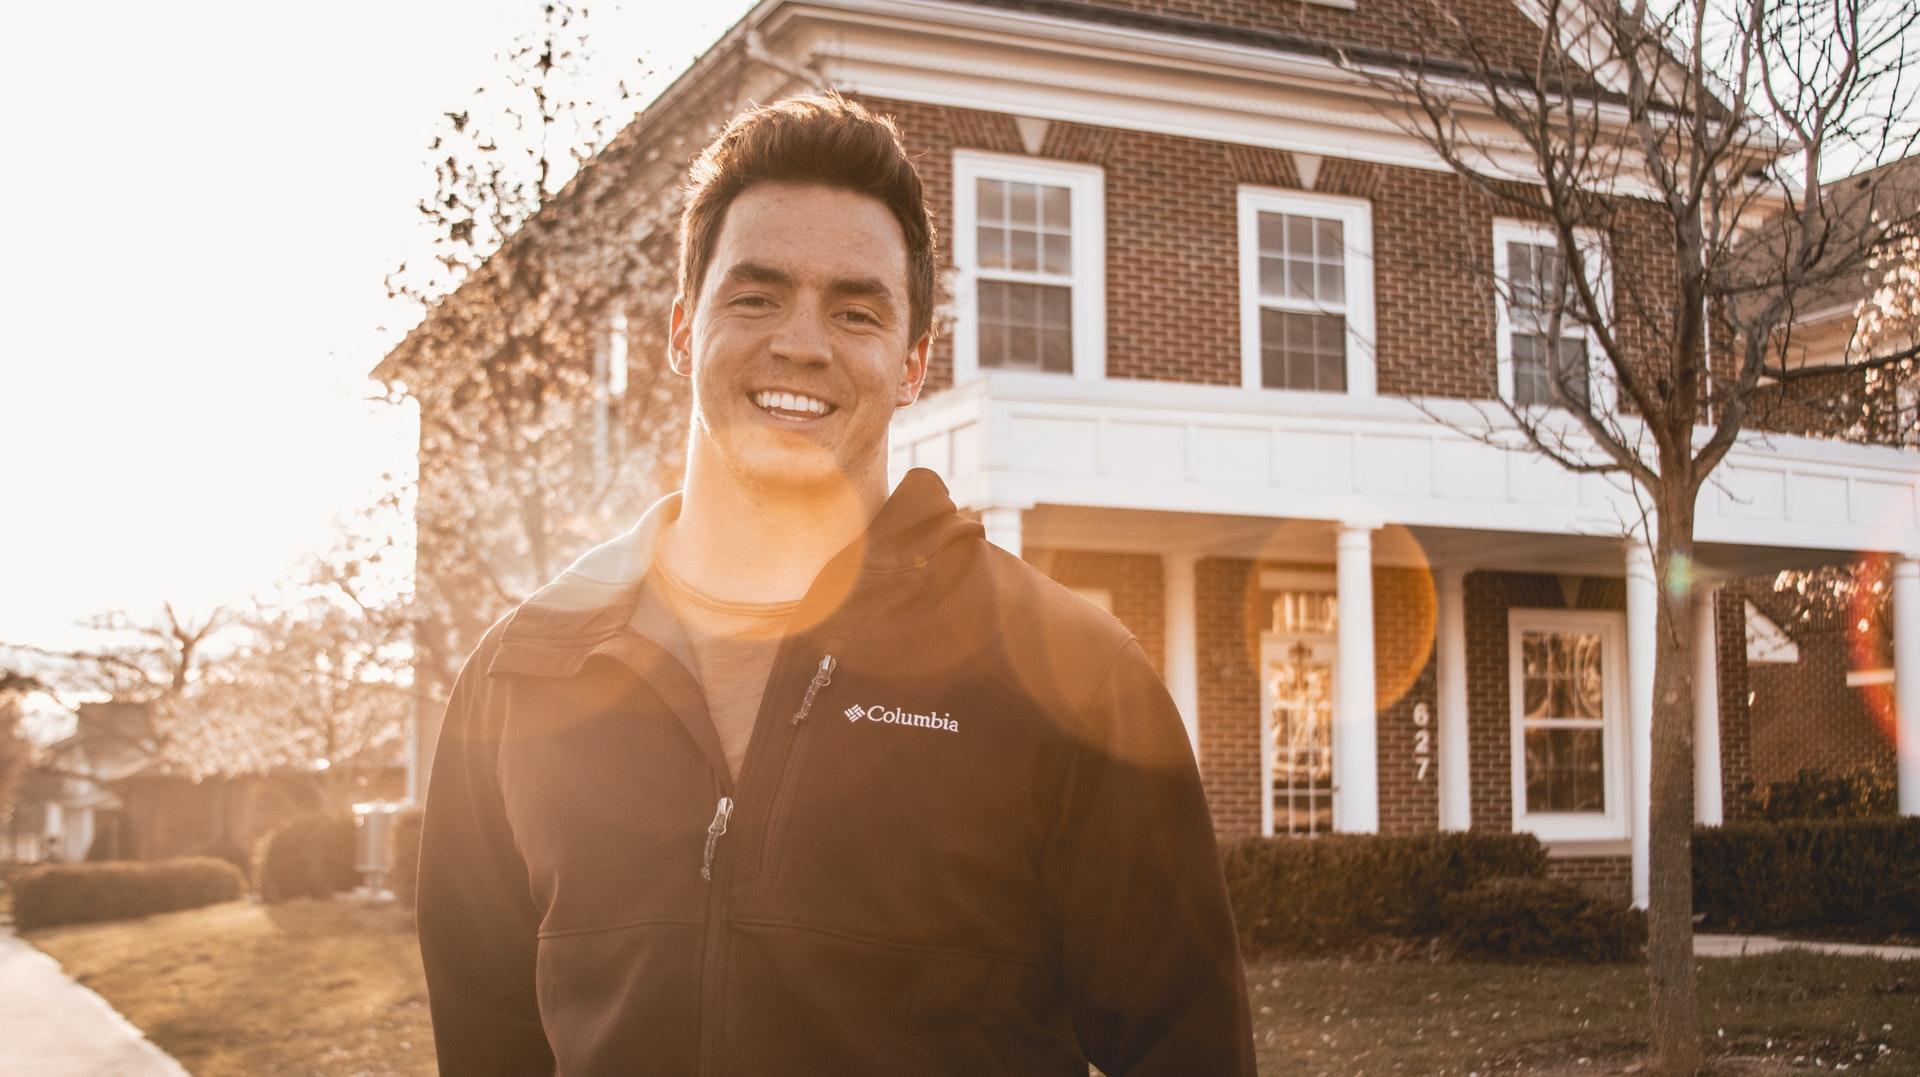 A man in a jacket standing in front of a house, potentially considering a home loan.